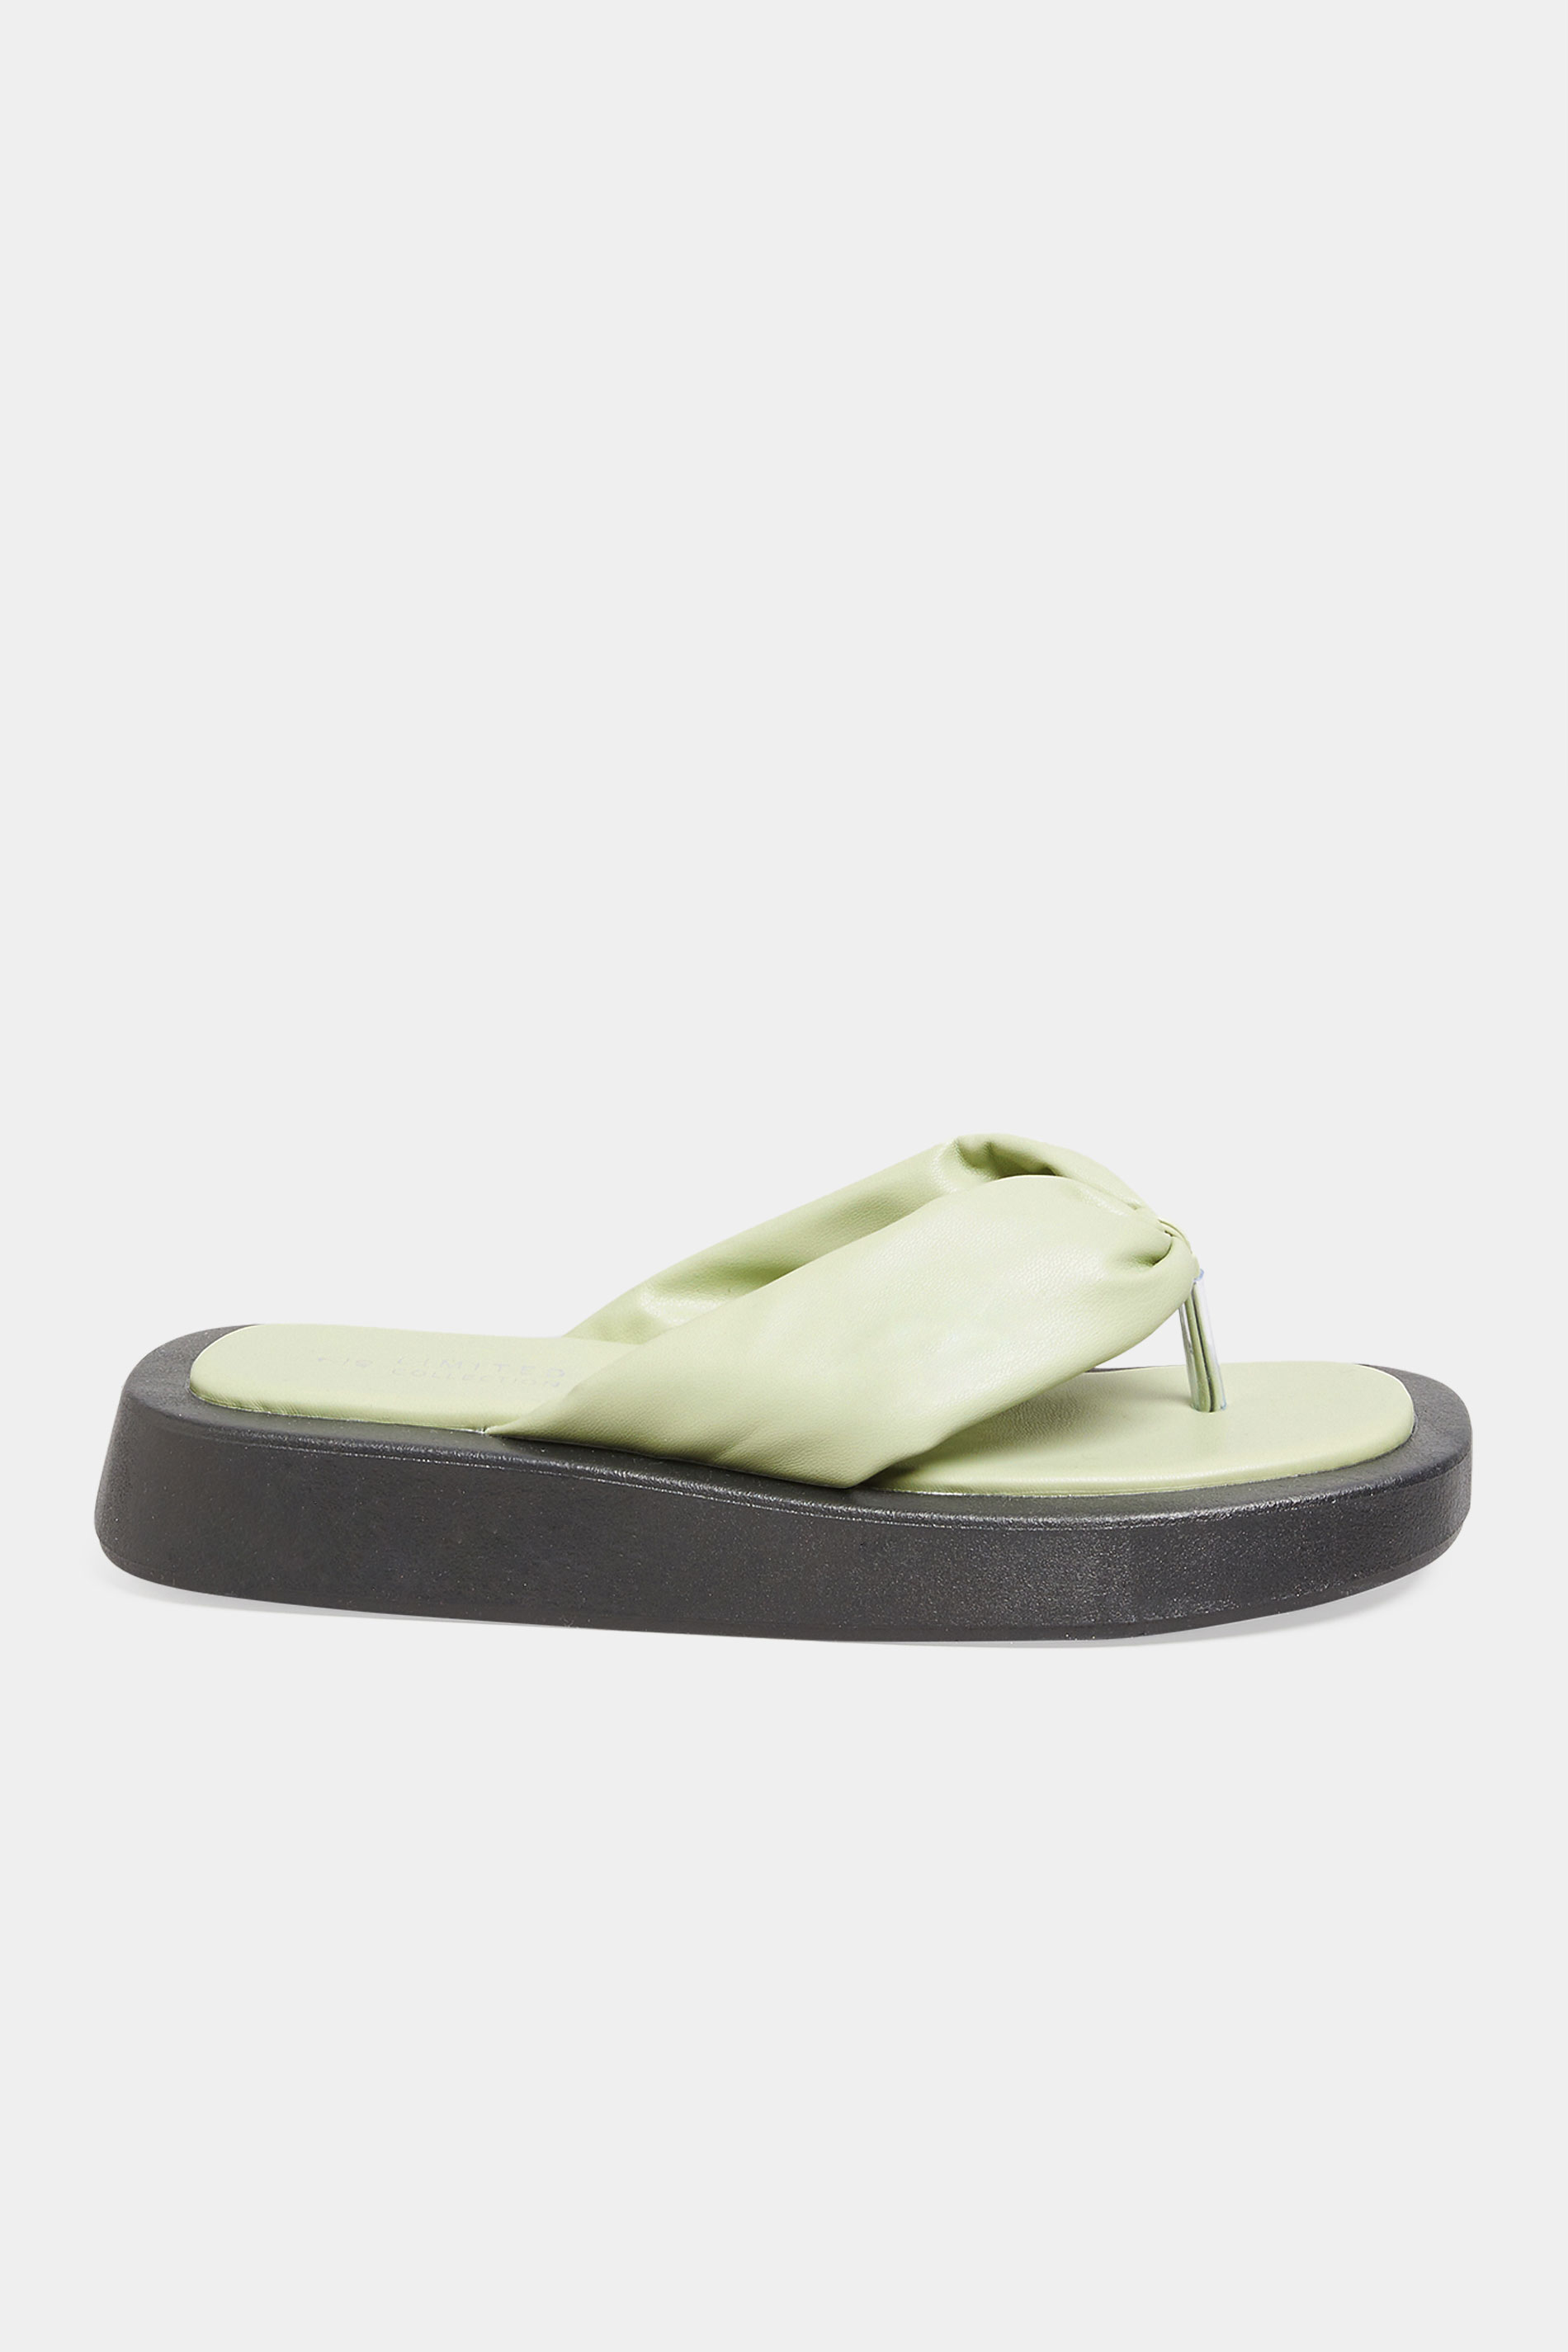 LIMITED COLLECTION Sage Green Flatform Sandals In Wide E Fit | Yours Clothing  3